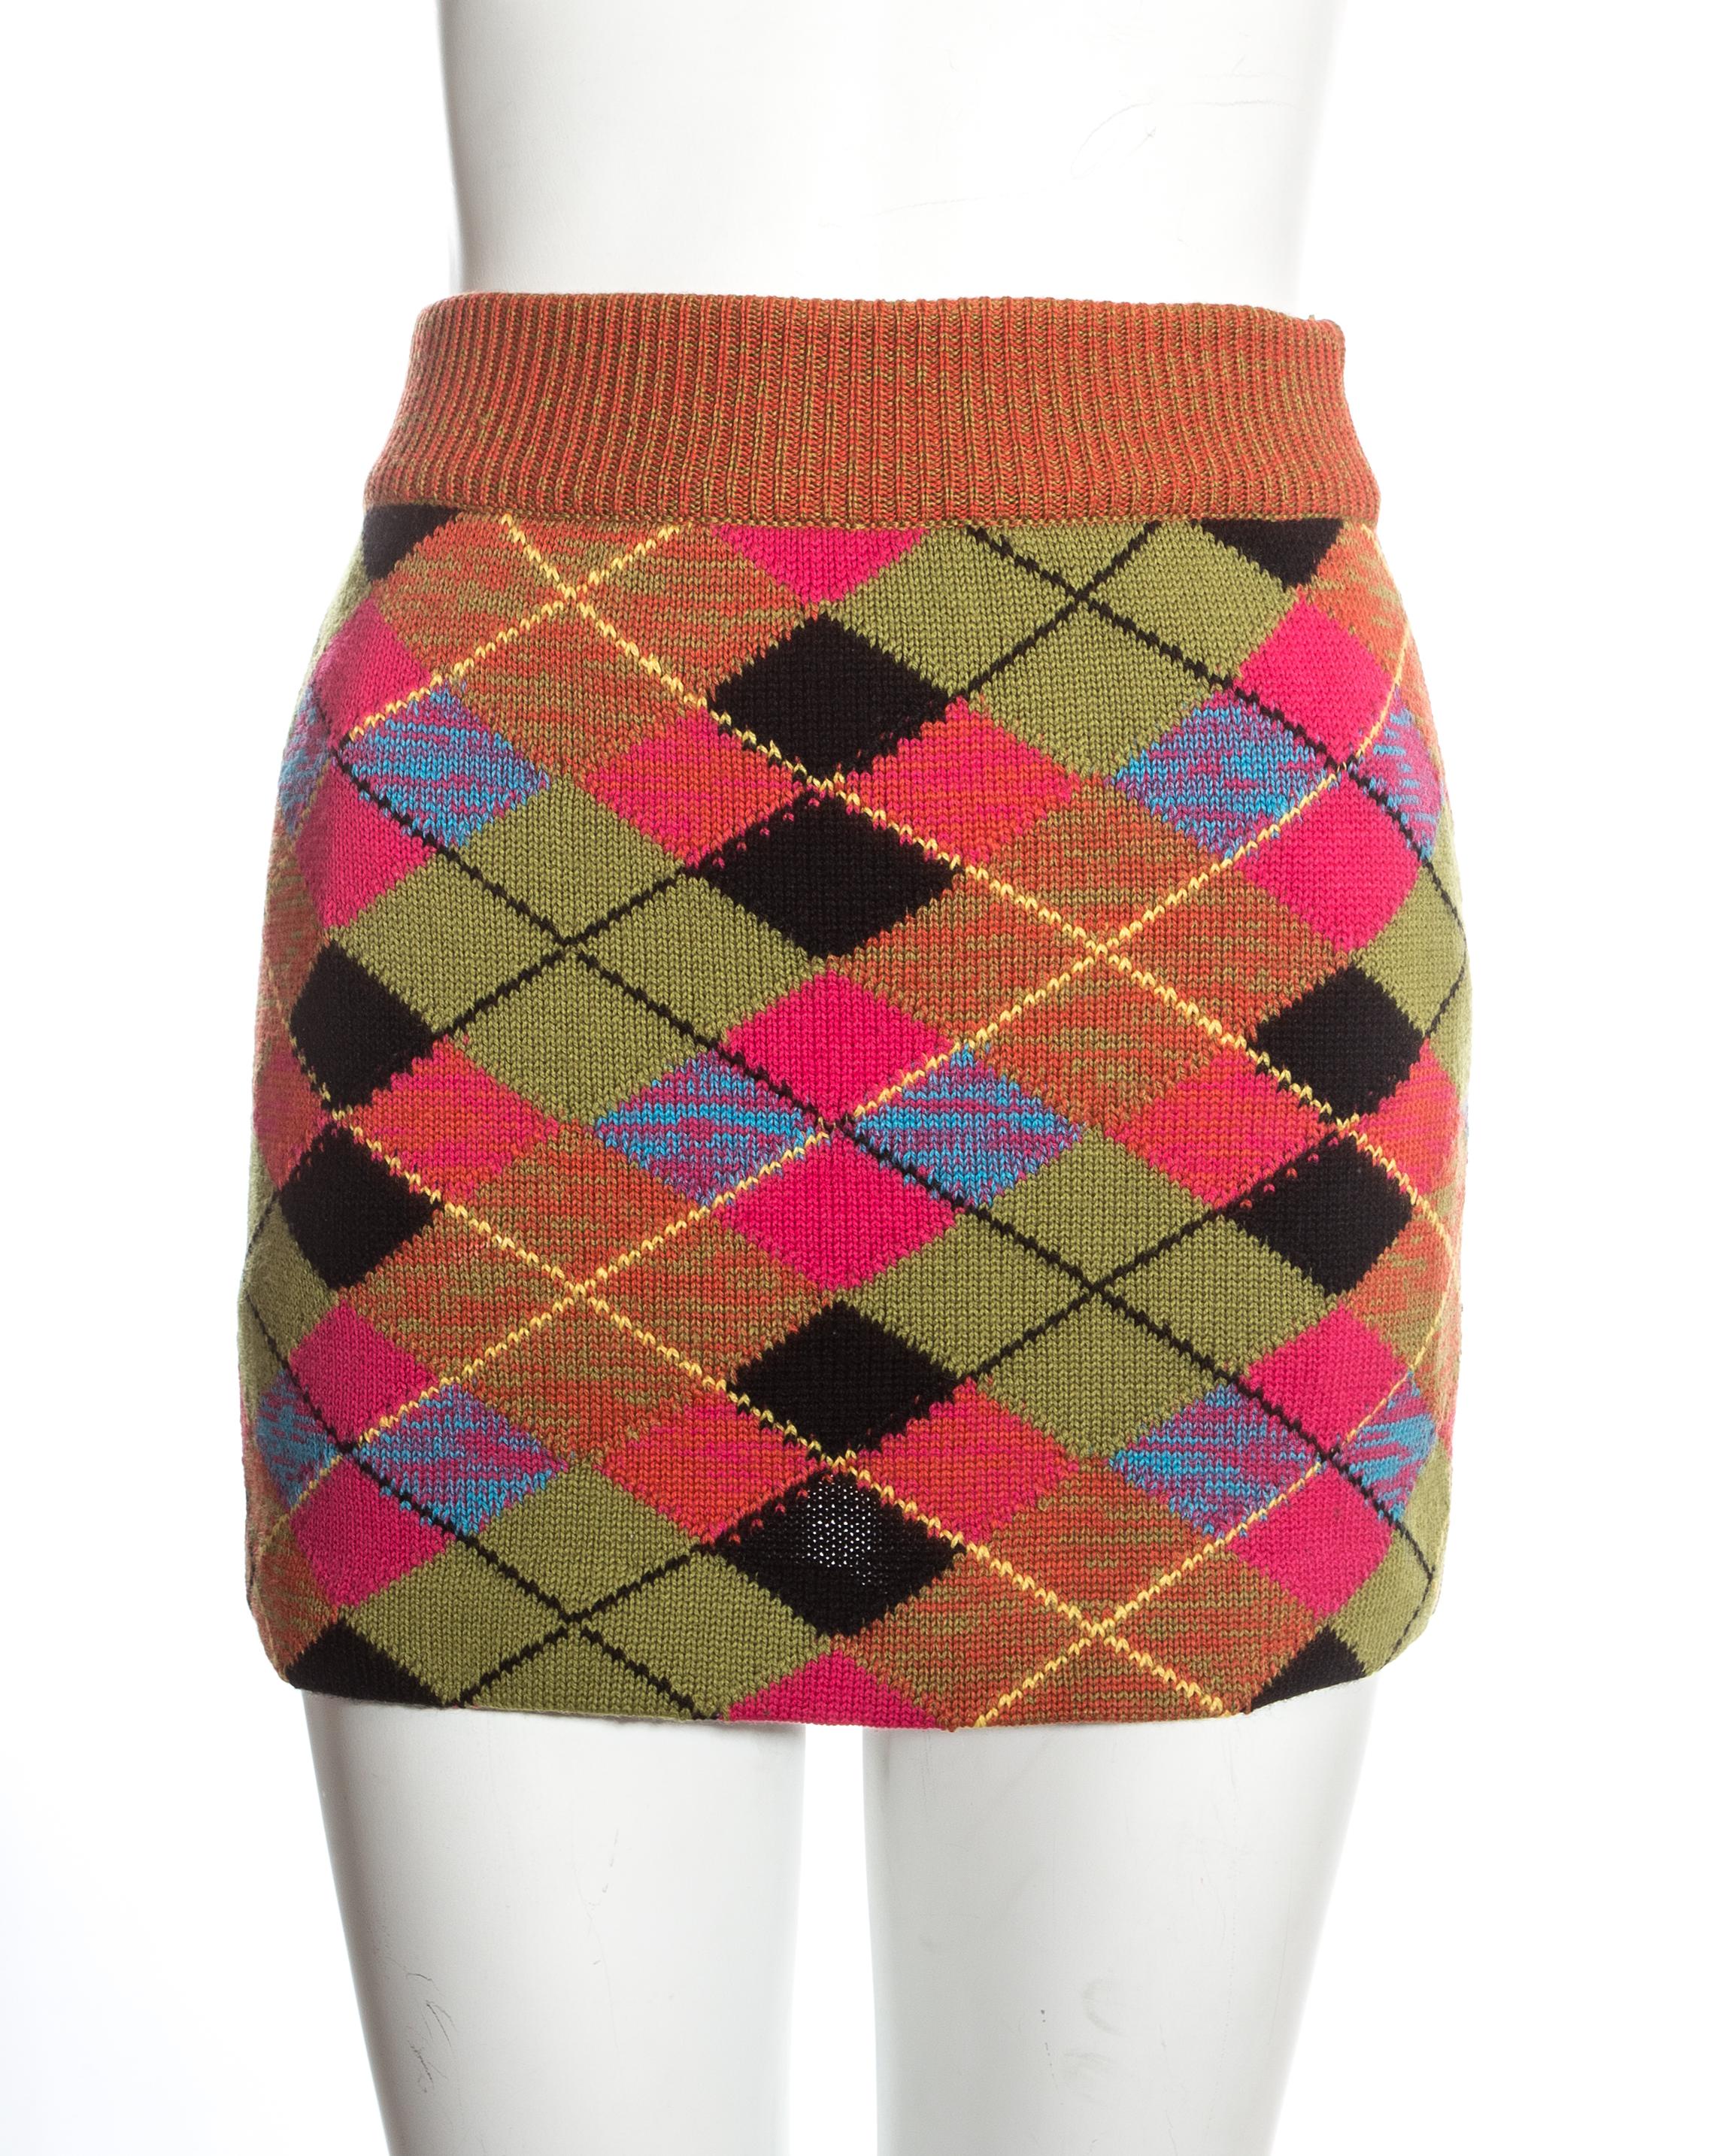 Vivienne Westwood argyle multicoloured knitted mini skirt

Fall-Winter 1994